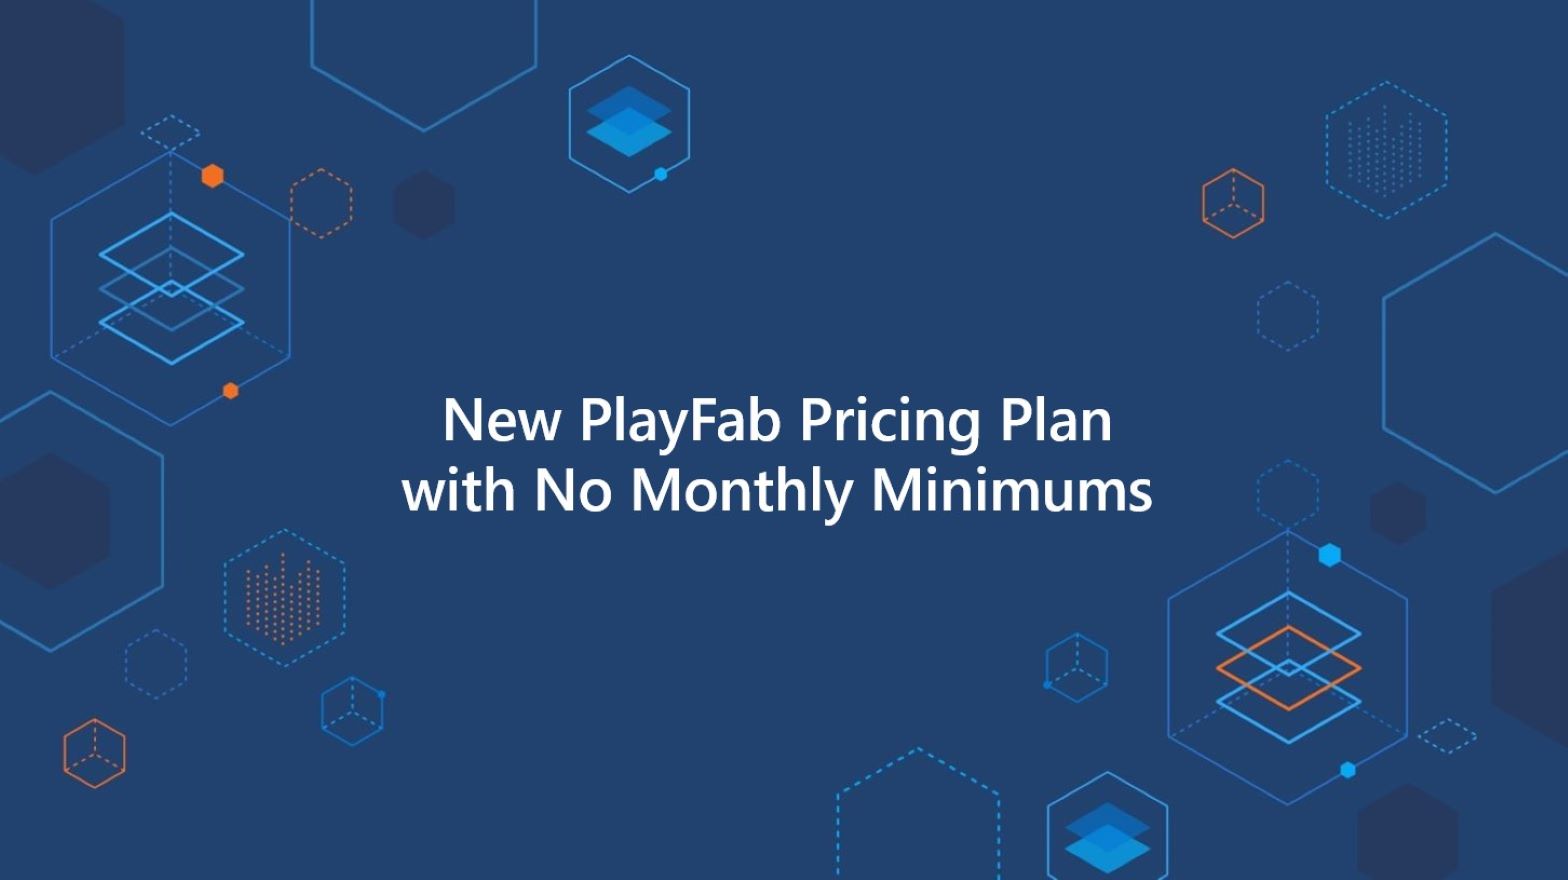 New Playfab pricing plan with no monthly minimums